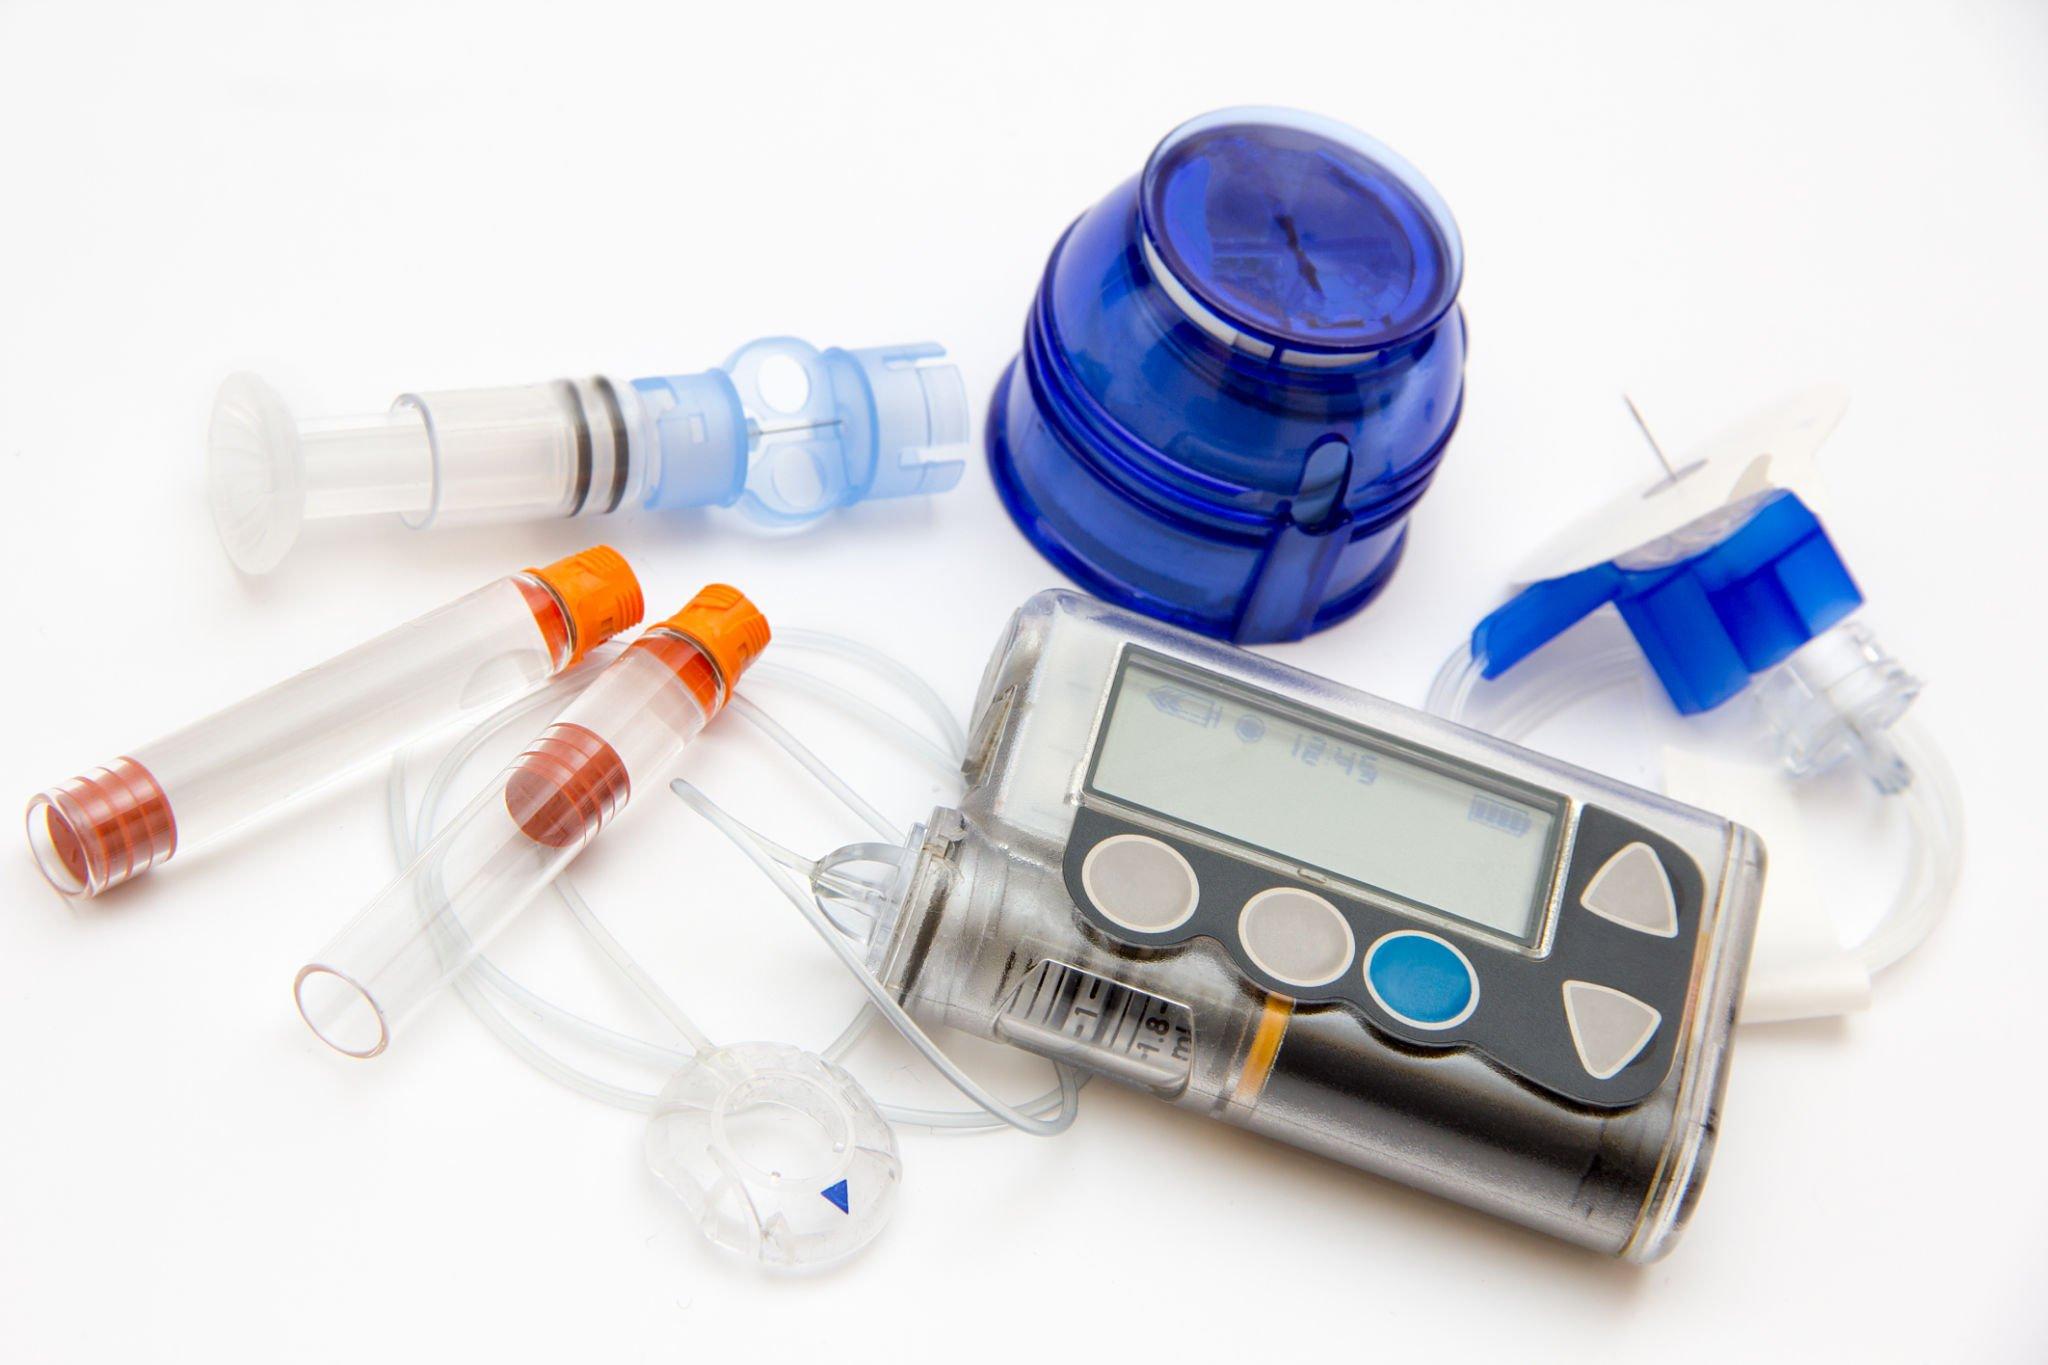 7 Powerful Reasons Why Insulin Pumps Are the Life-Changing Future of Diabetes Care